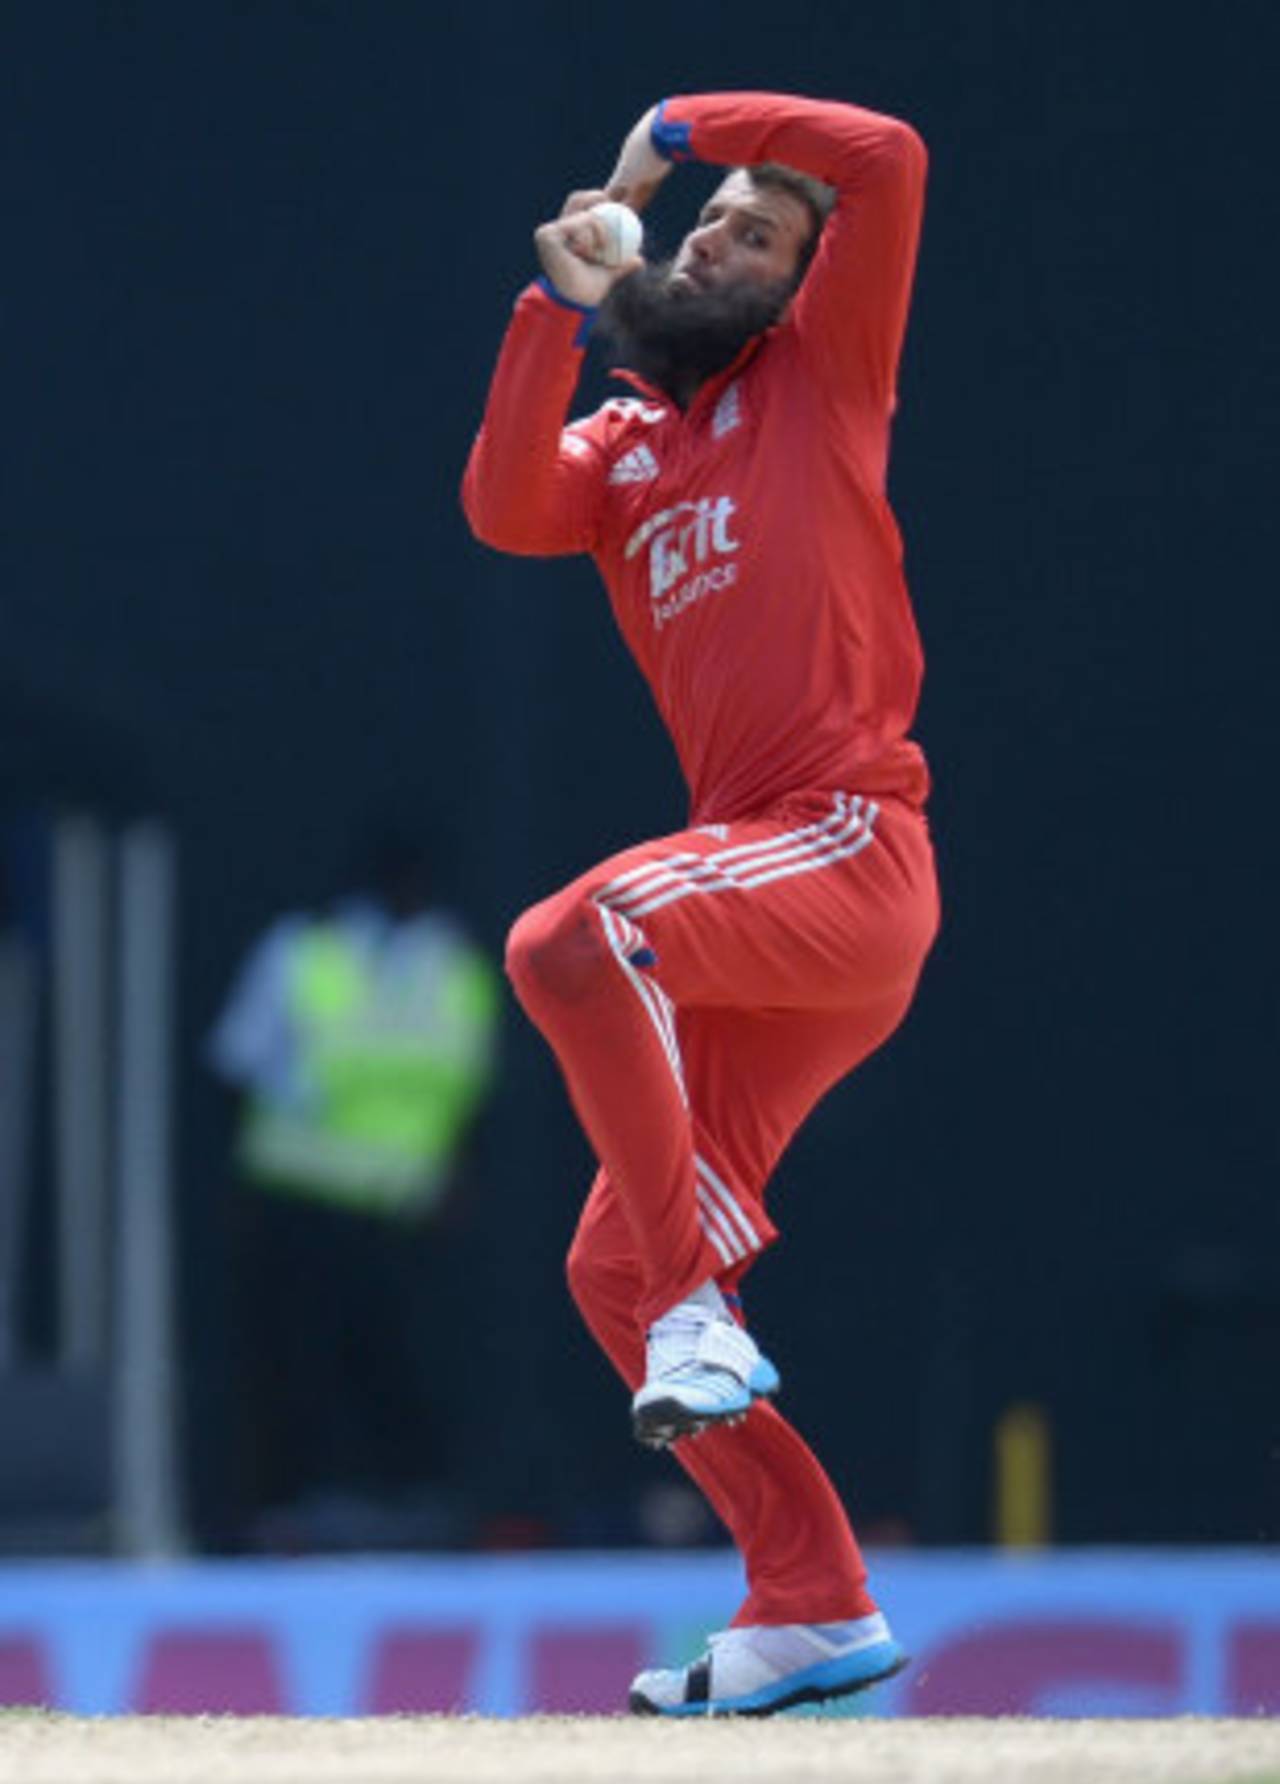 Moeen Ali in his delivery on ODI debut, West Indies v England, 1st ODI, North Sound, February 28, 2014